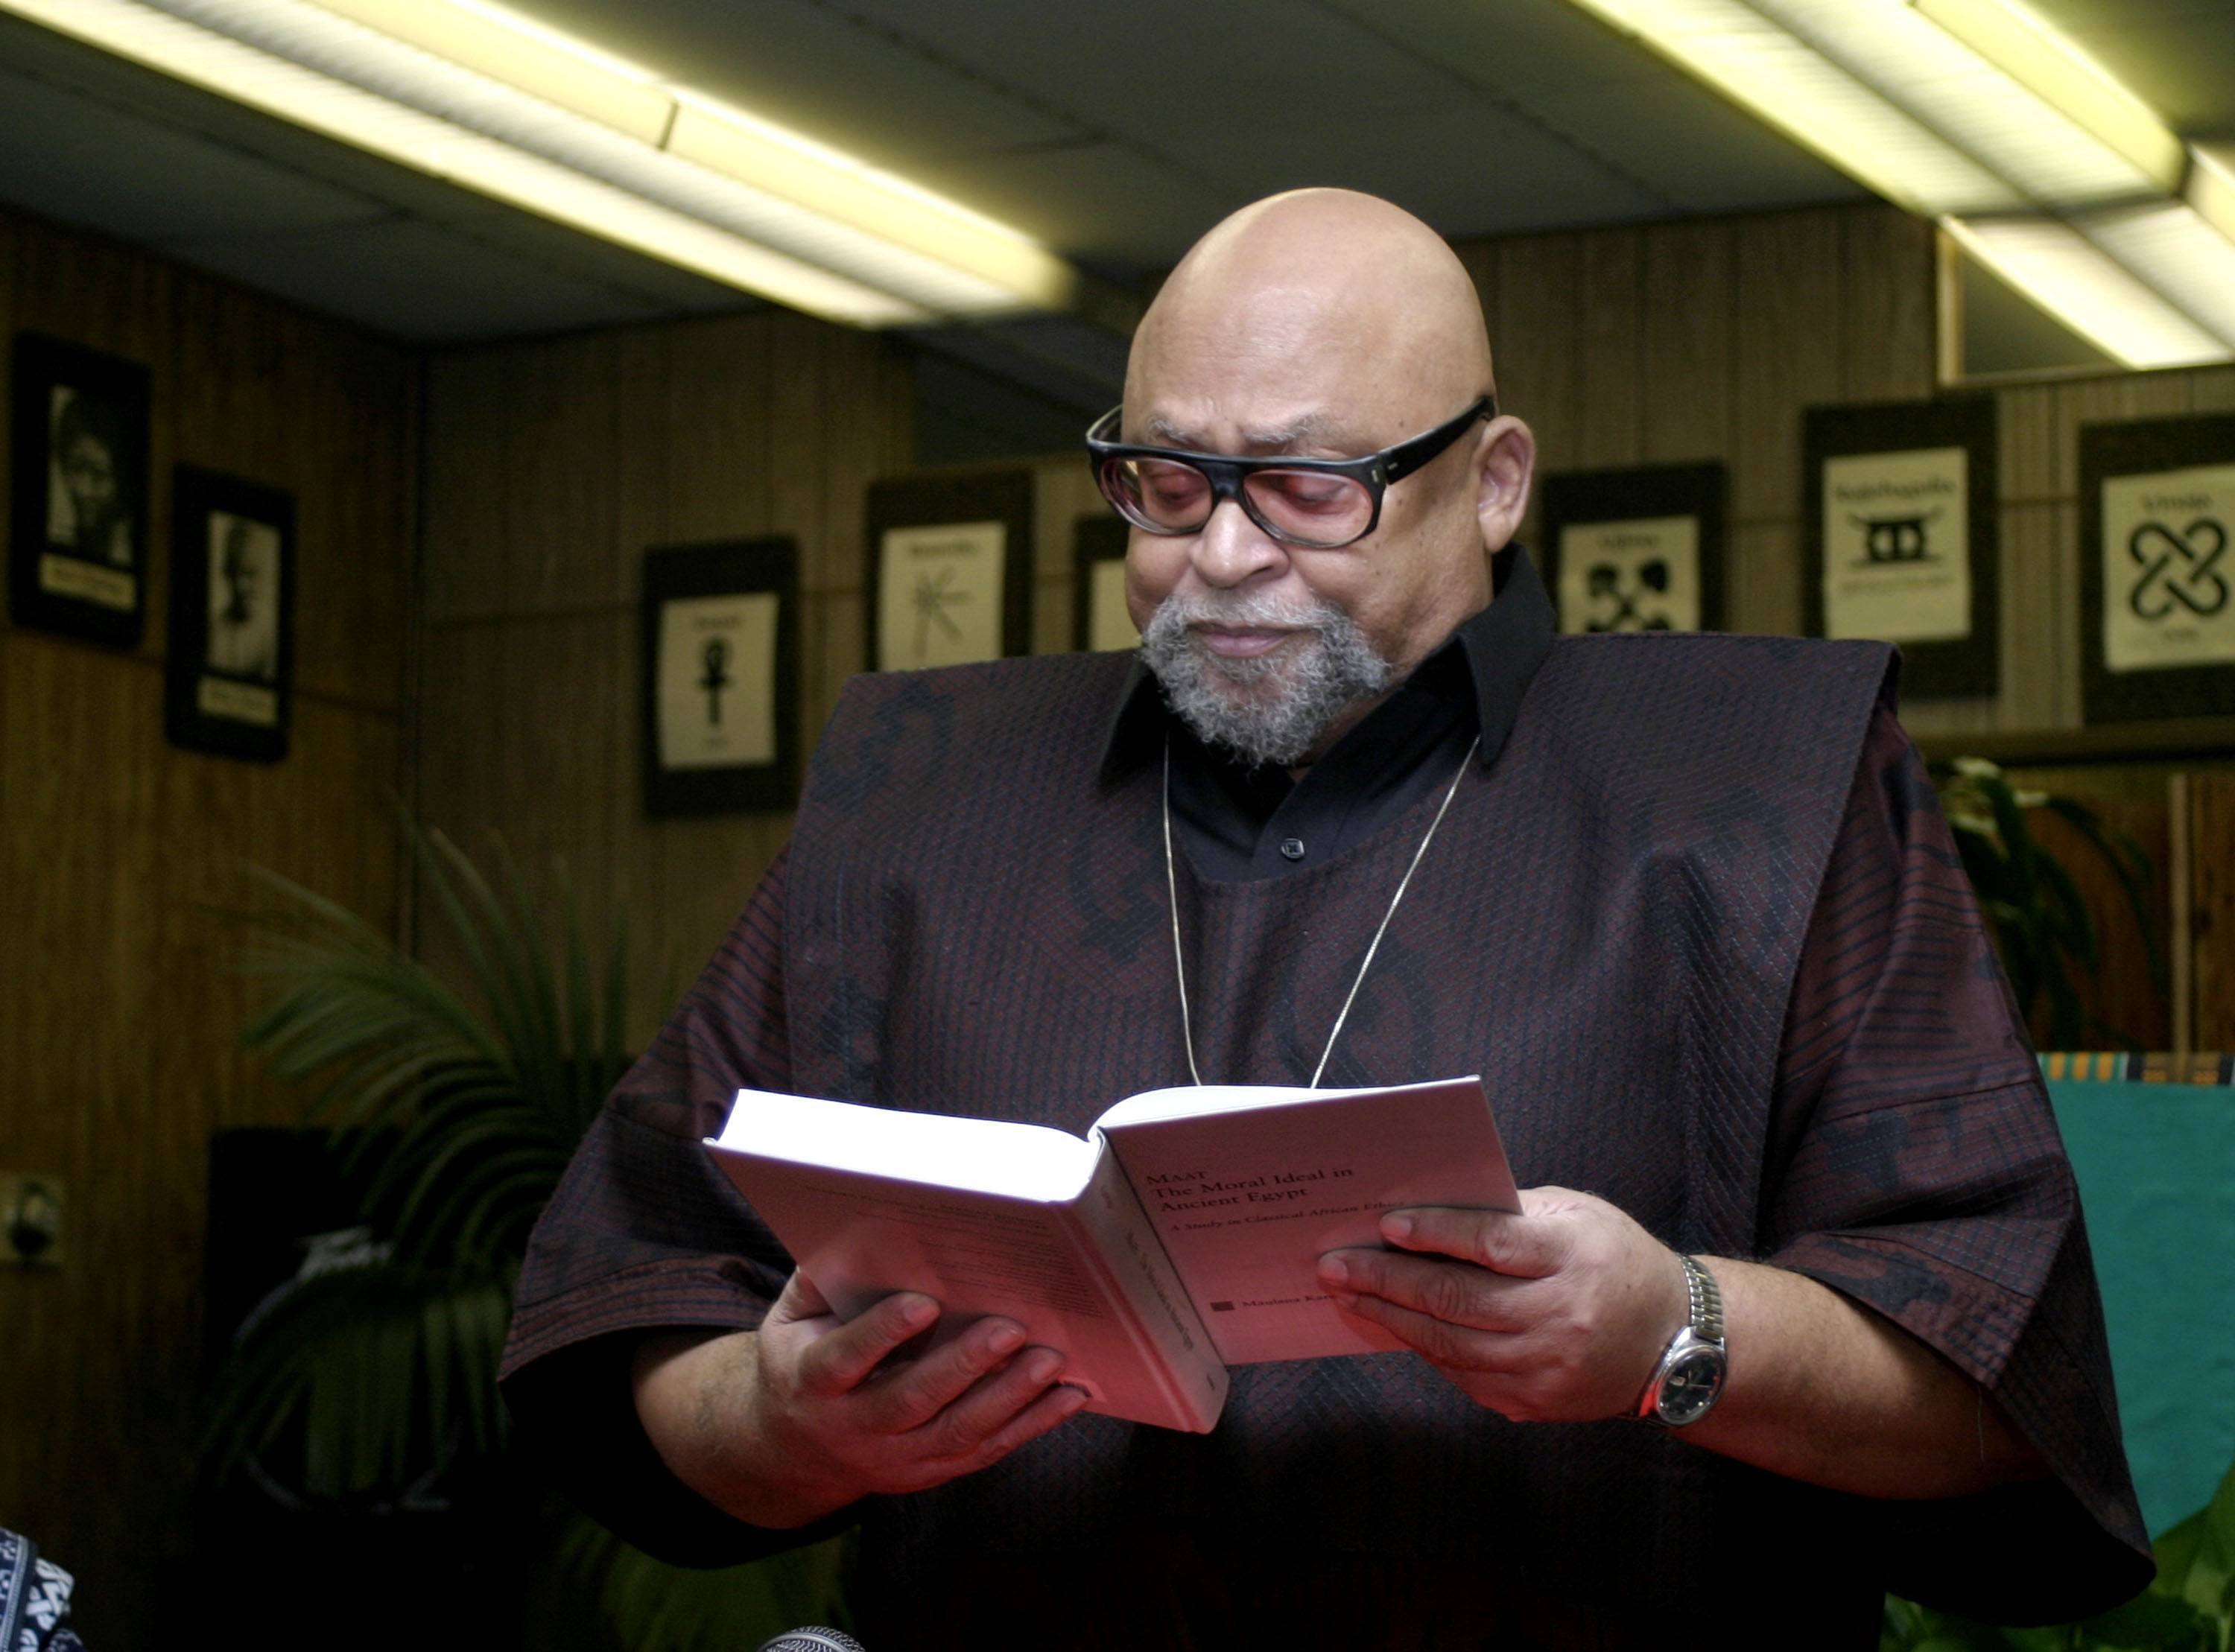 Dr. Maulana Karenga during Dr. Maulana Karenga Booksigning "Maat The Moral Ideal In Ancient Egypt" at African American Cultural Center (Us) in Los Angeles, California, United States. (Photo by Malcolm Ali/WireImage)